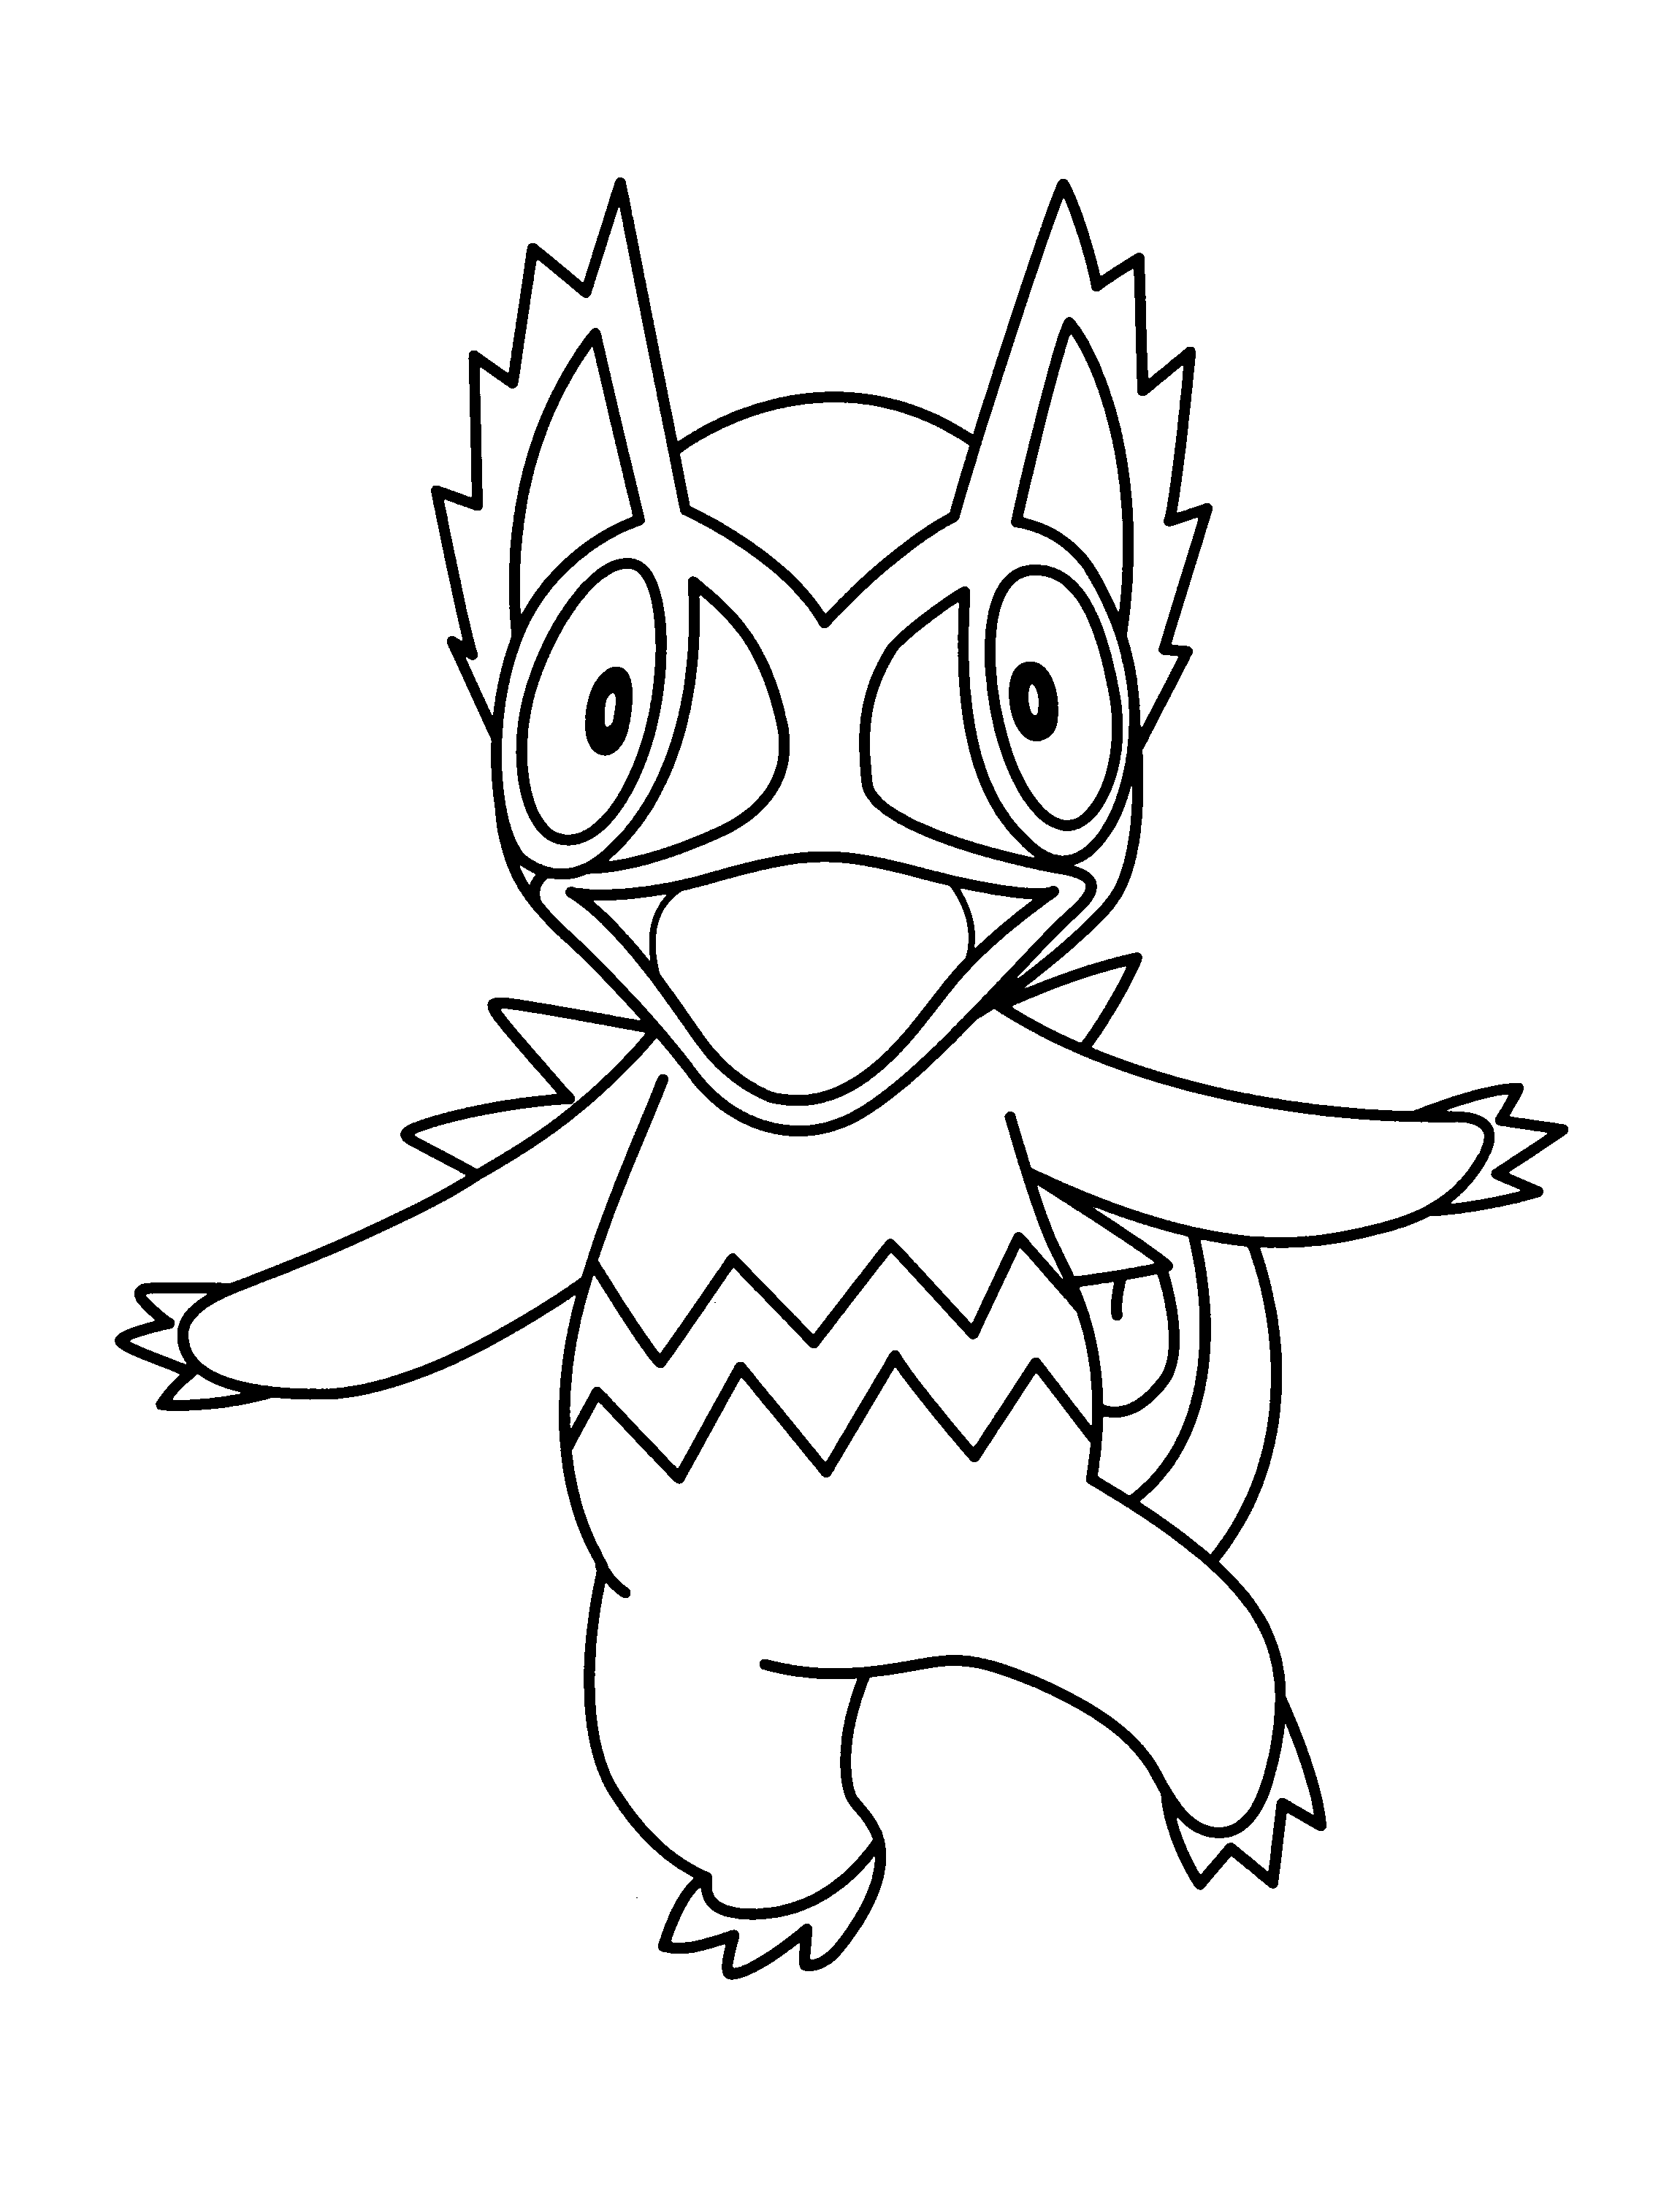 animated-coloring-pages-pokemon-image-0822